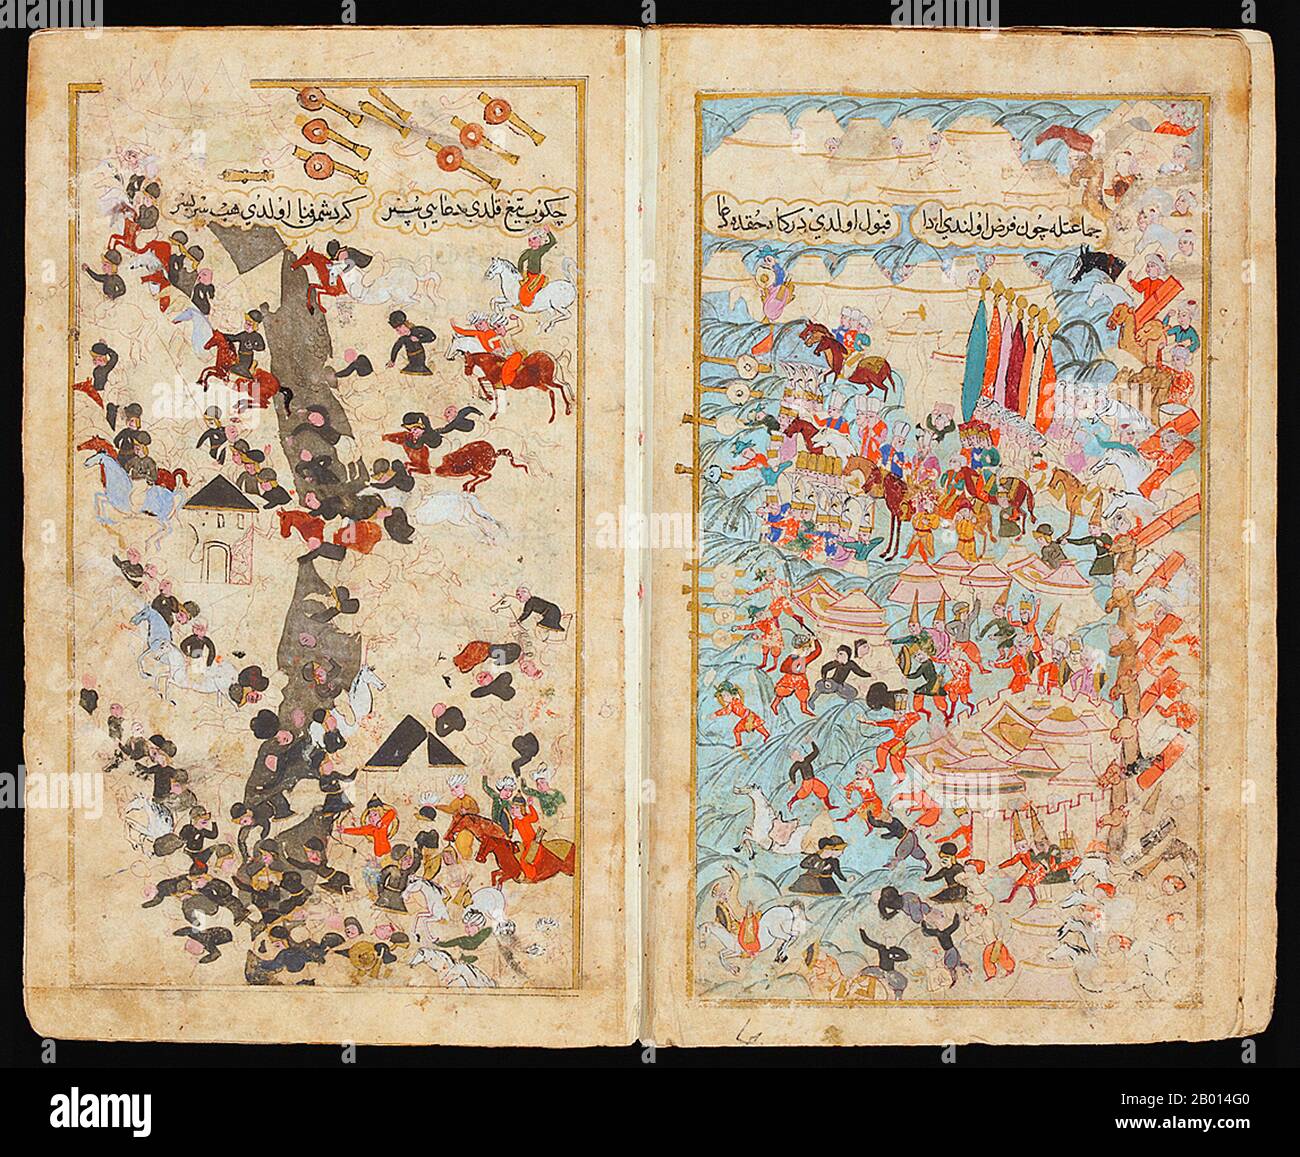 Turkey: 'The Battle of Hacova (Keresztes) in Hungary in 1596, when the Ottomans vanquished the Hapsburg forces'. Miniature paintings from an illustrated manuscript depicting the 1596 military campaign in Hungary by Ottoman Sultan Mehmed III, c. 1600.  Mehmed III Adli (May 26, 1566 – December 21/22, 1603) was sultan of the Ottoman Empire from 1595-1603. He was notorious for having nineteen of his brothers and half brothers murdered to secure power. He also killed over twenty of his sisters. They were all strangled by deaf-mutes. Mehmed III was an idle ruler, leaving government to his mother. Stock Photo